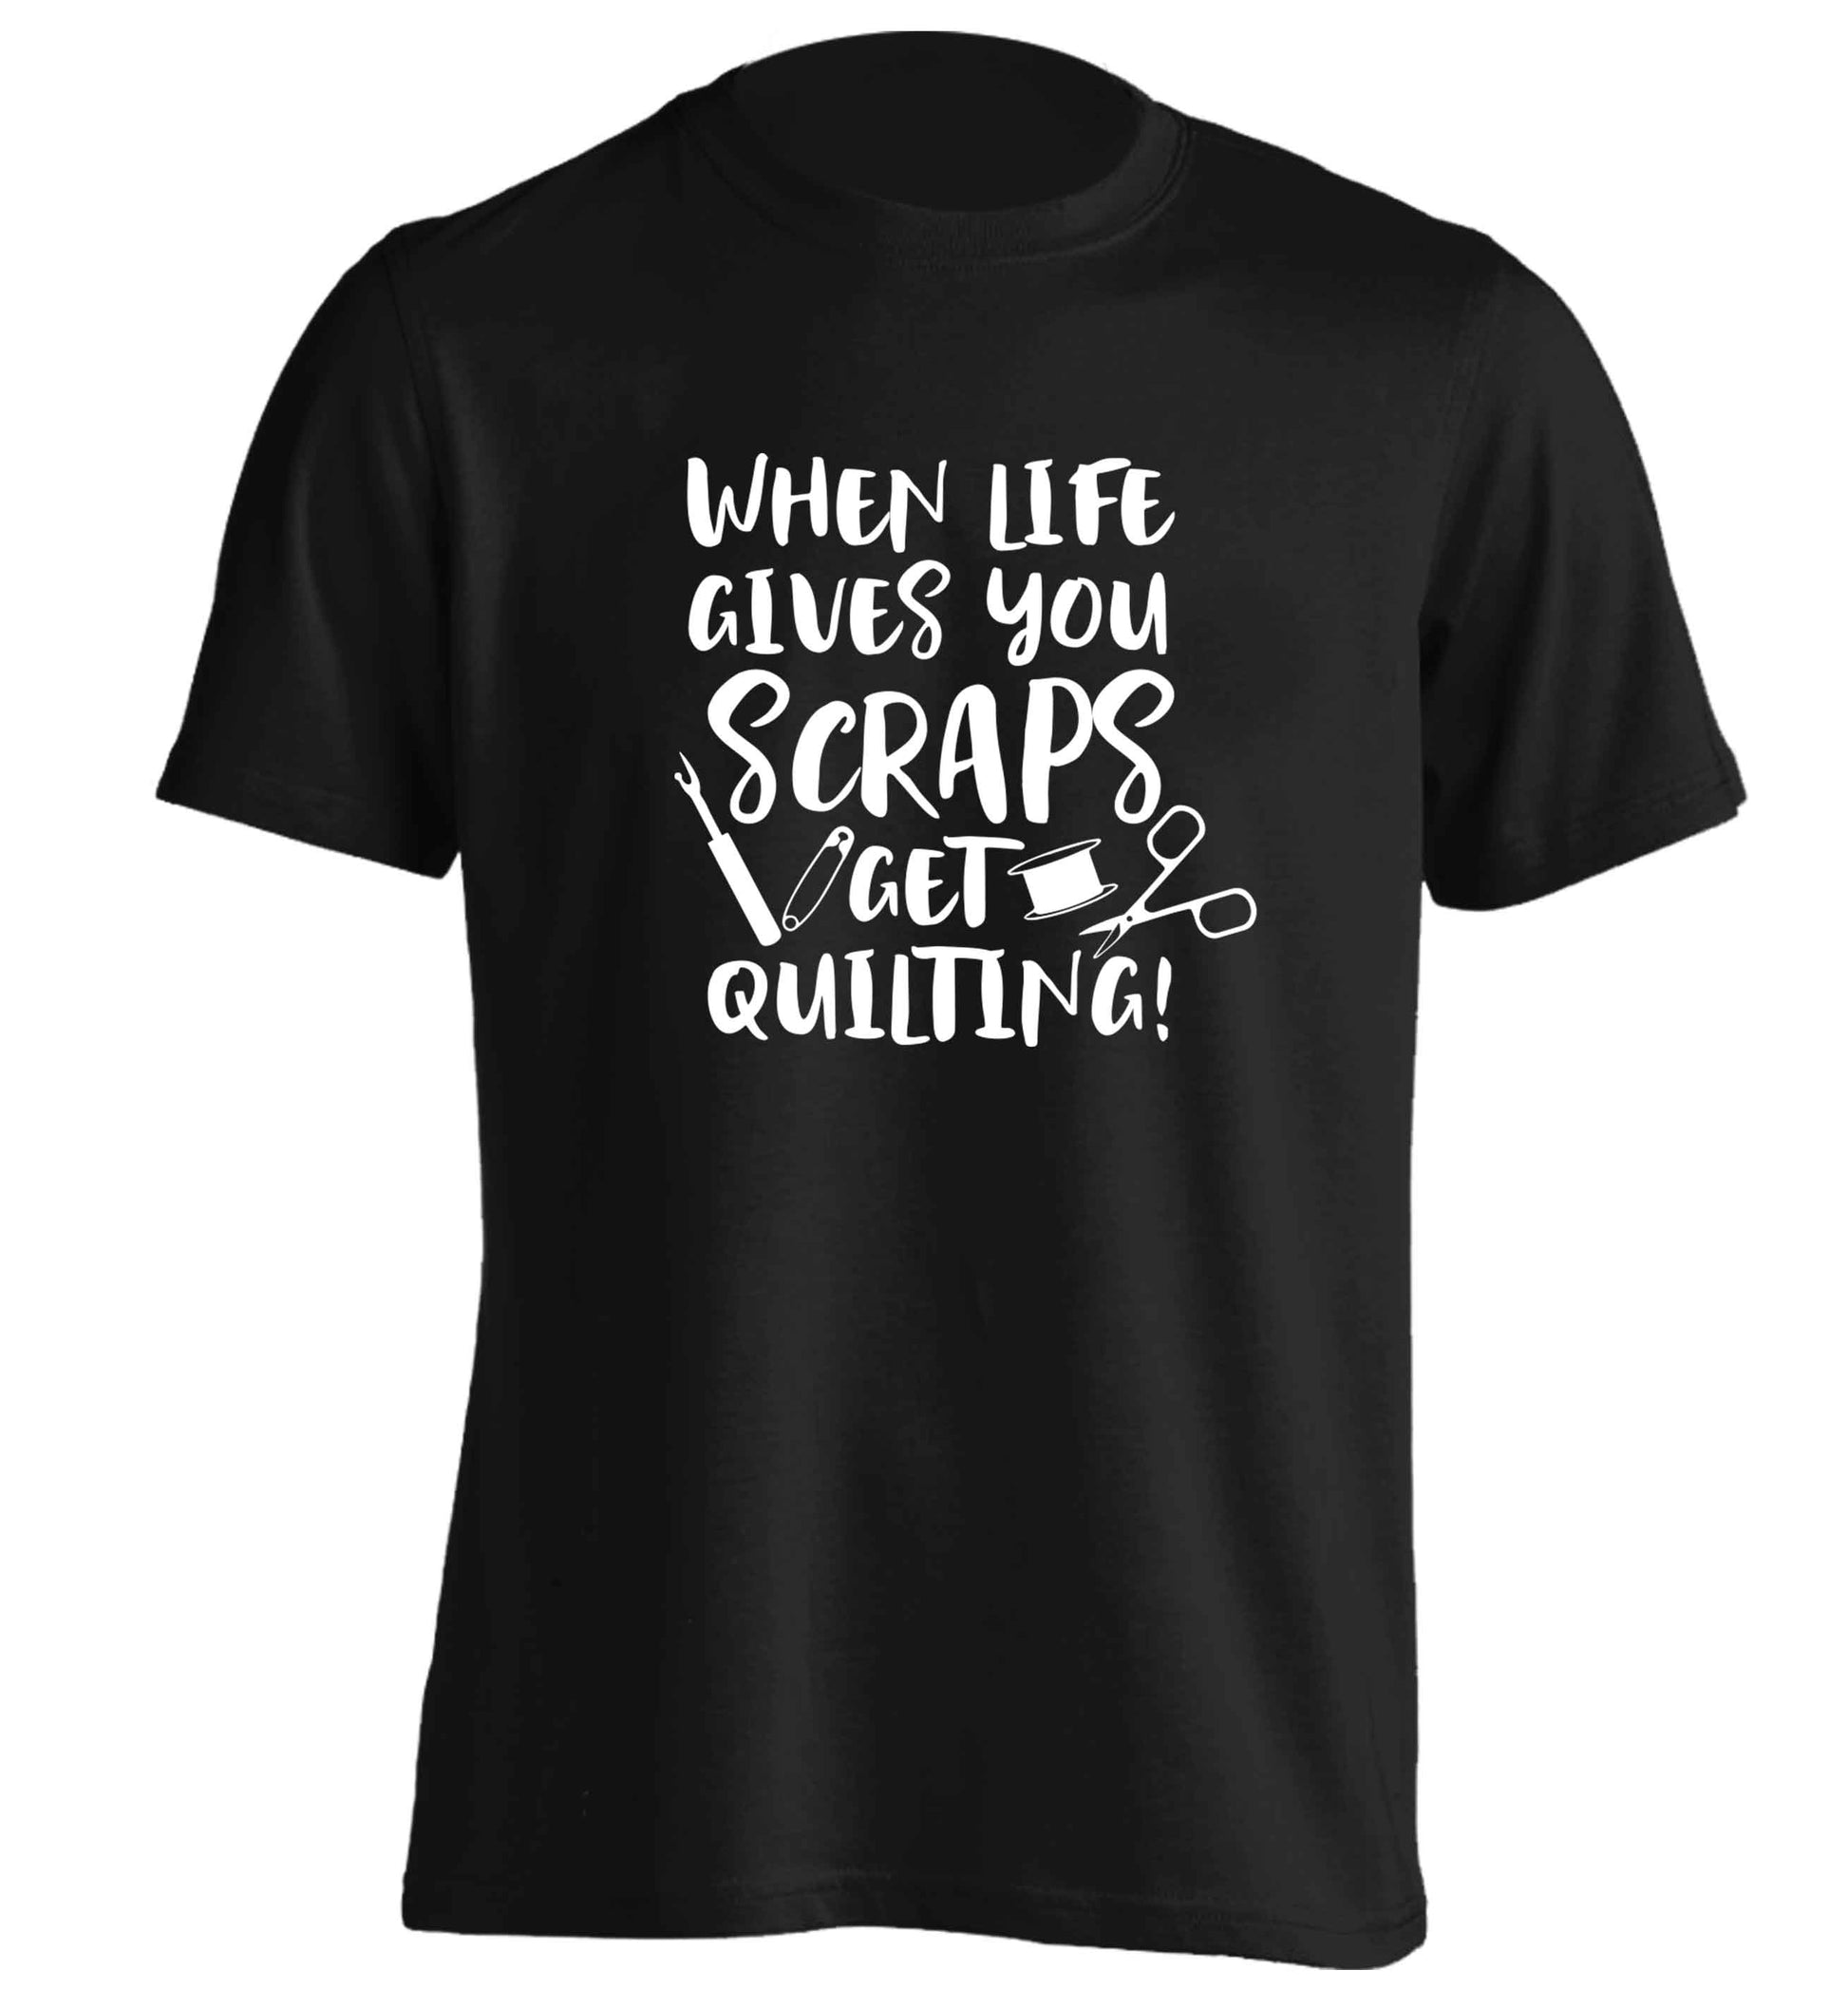 When life gives you scraps get quilting! adults unisex black Tshirt 2XL